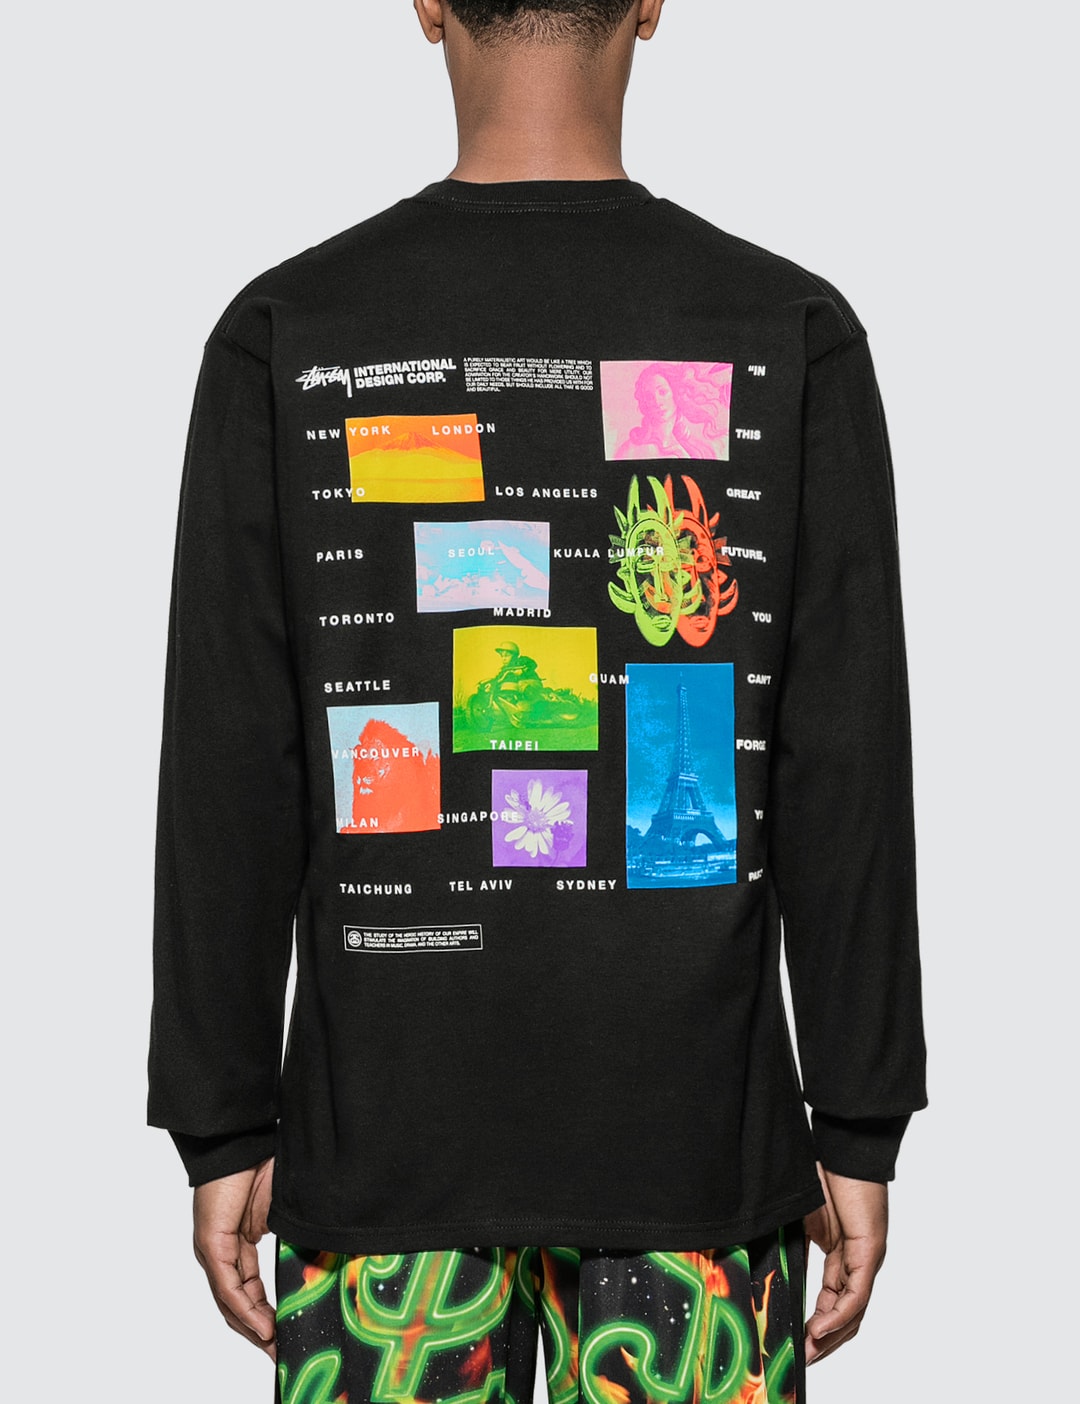 Stüssy - Great Future Long Sleeve T-shirt | HBX - Globally Curated ...